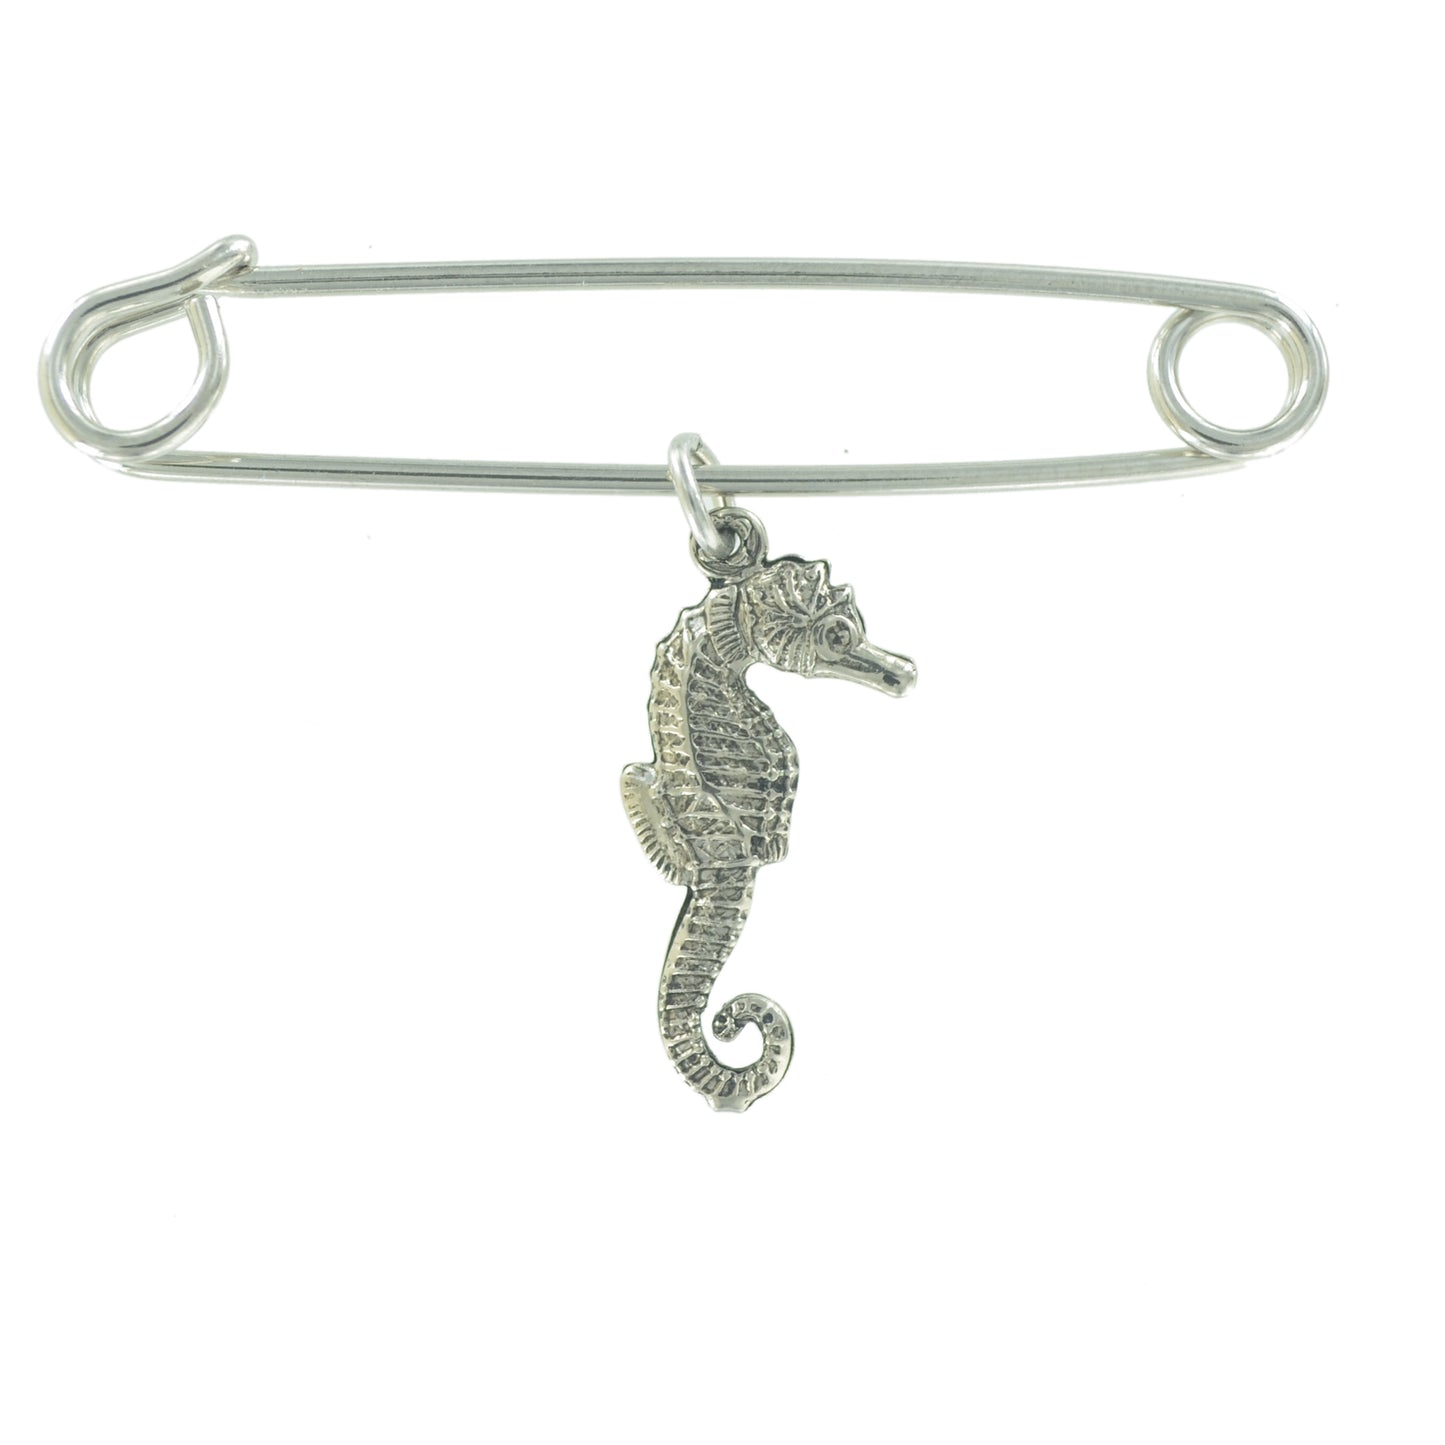 Ky & Co Made in USA Safety Pin Brooch Seahorse Charm Silver Tone  2"